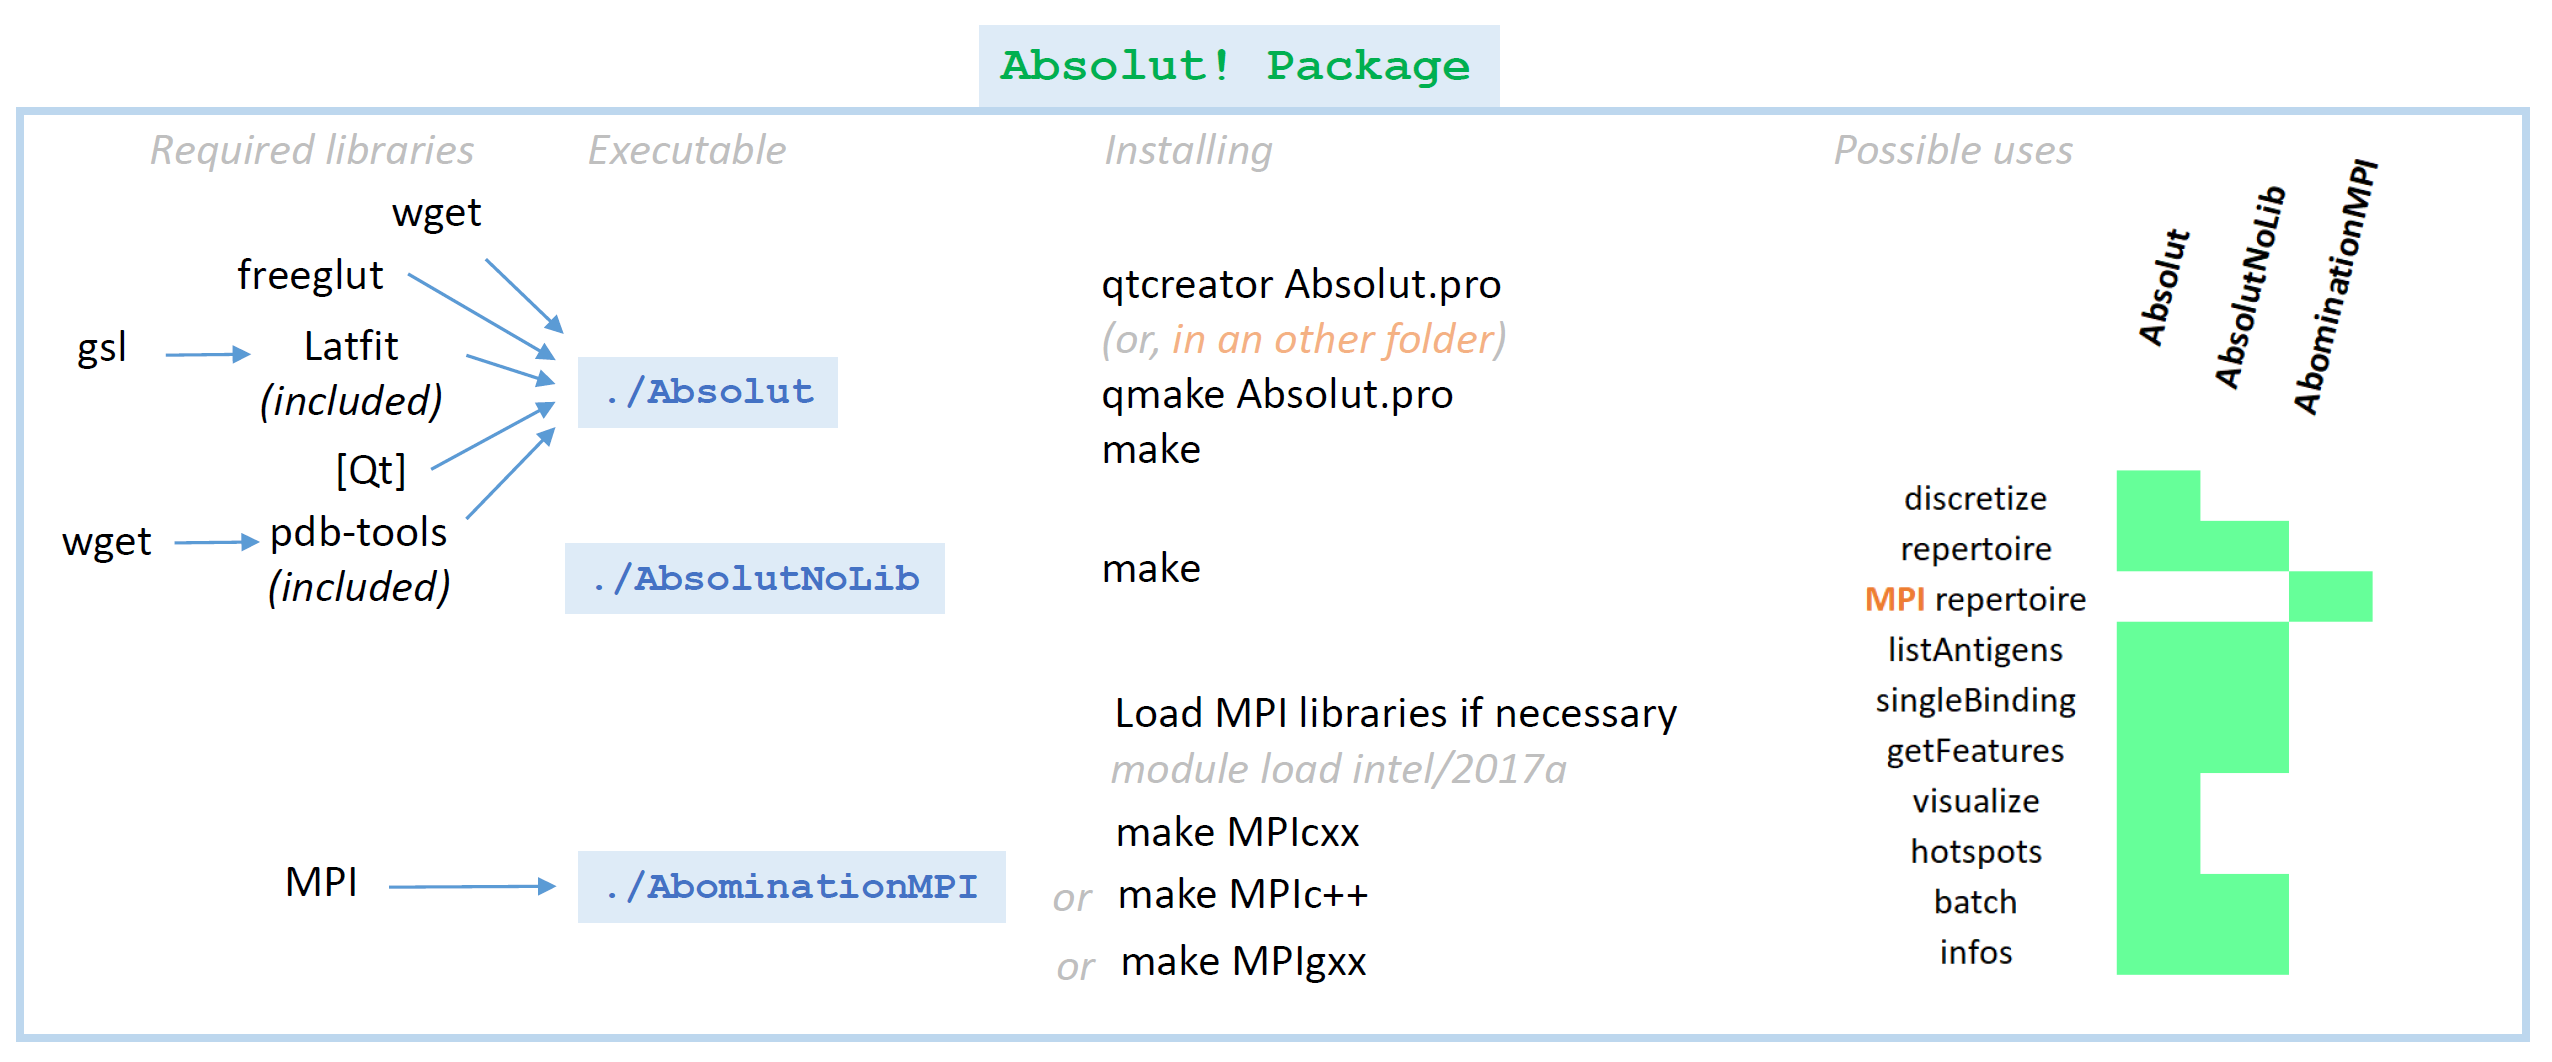 Absolut! Package overview